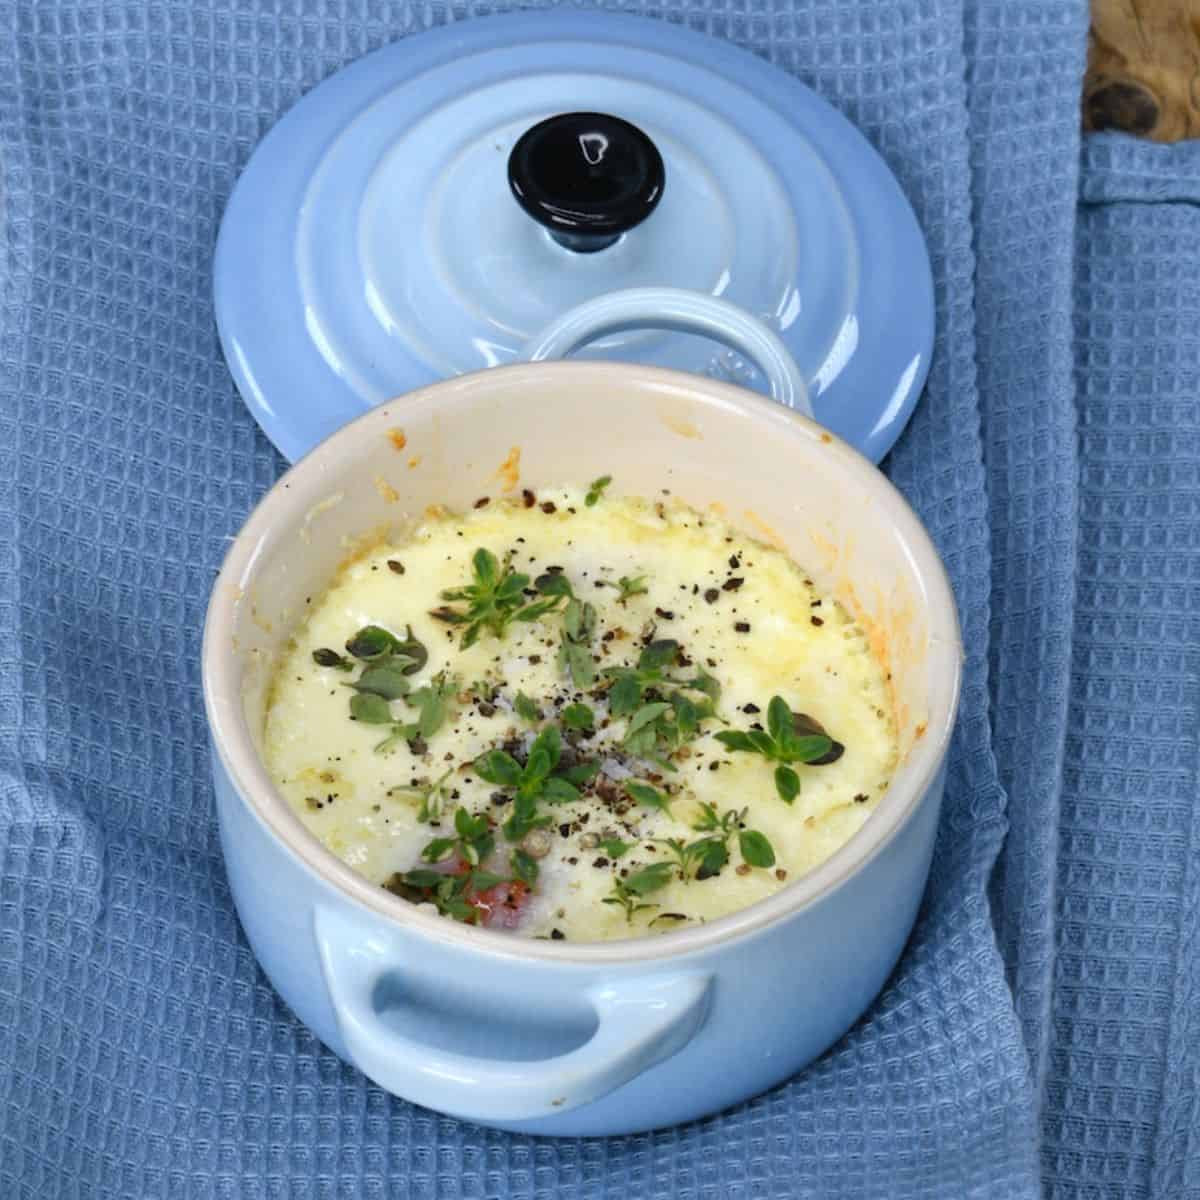 French baked eggs topped with herbs